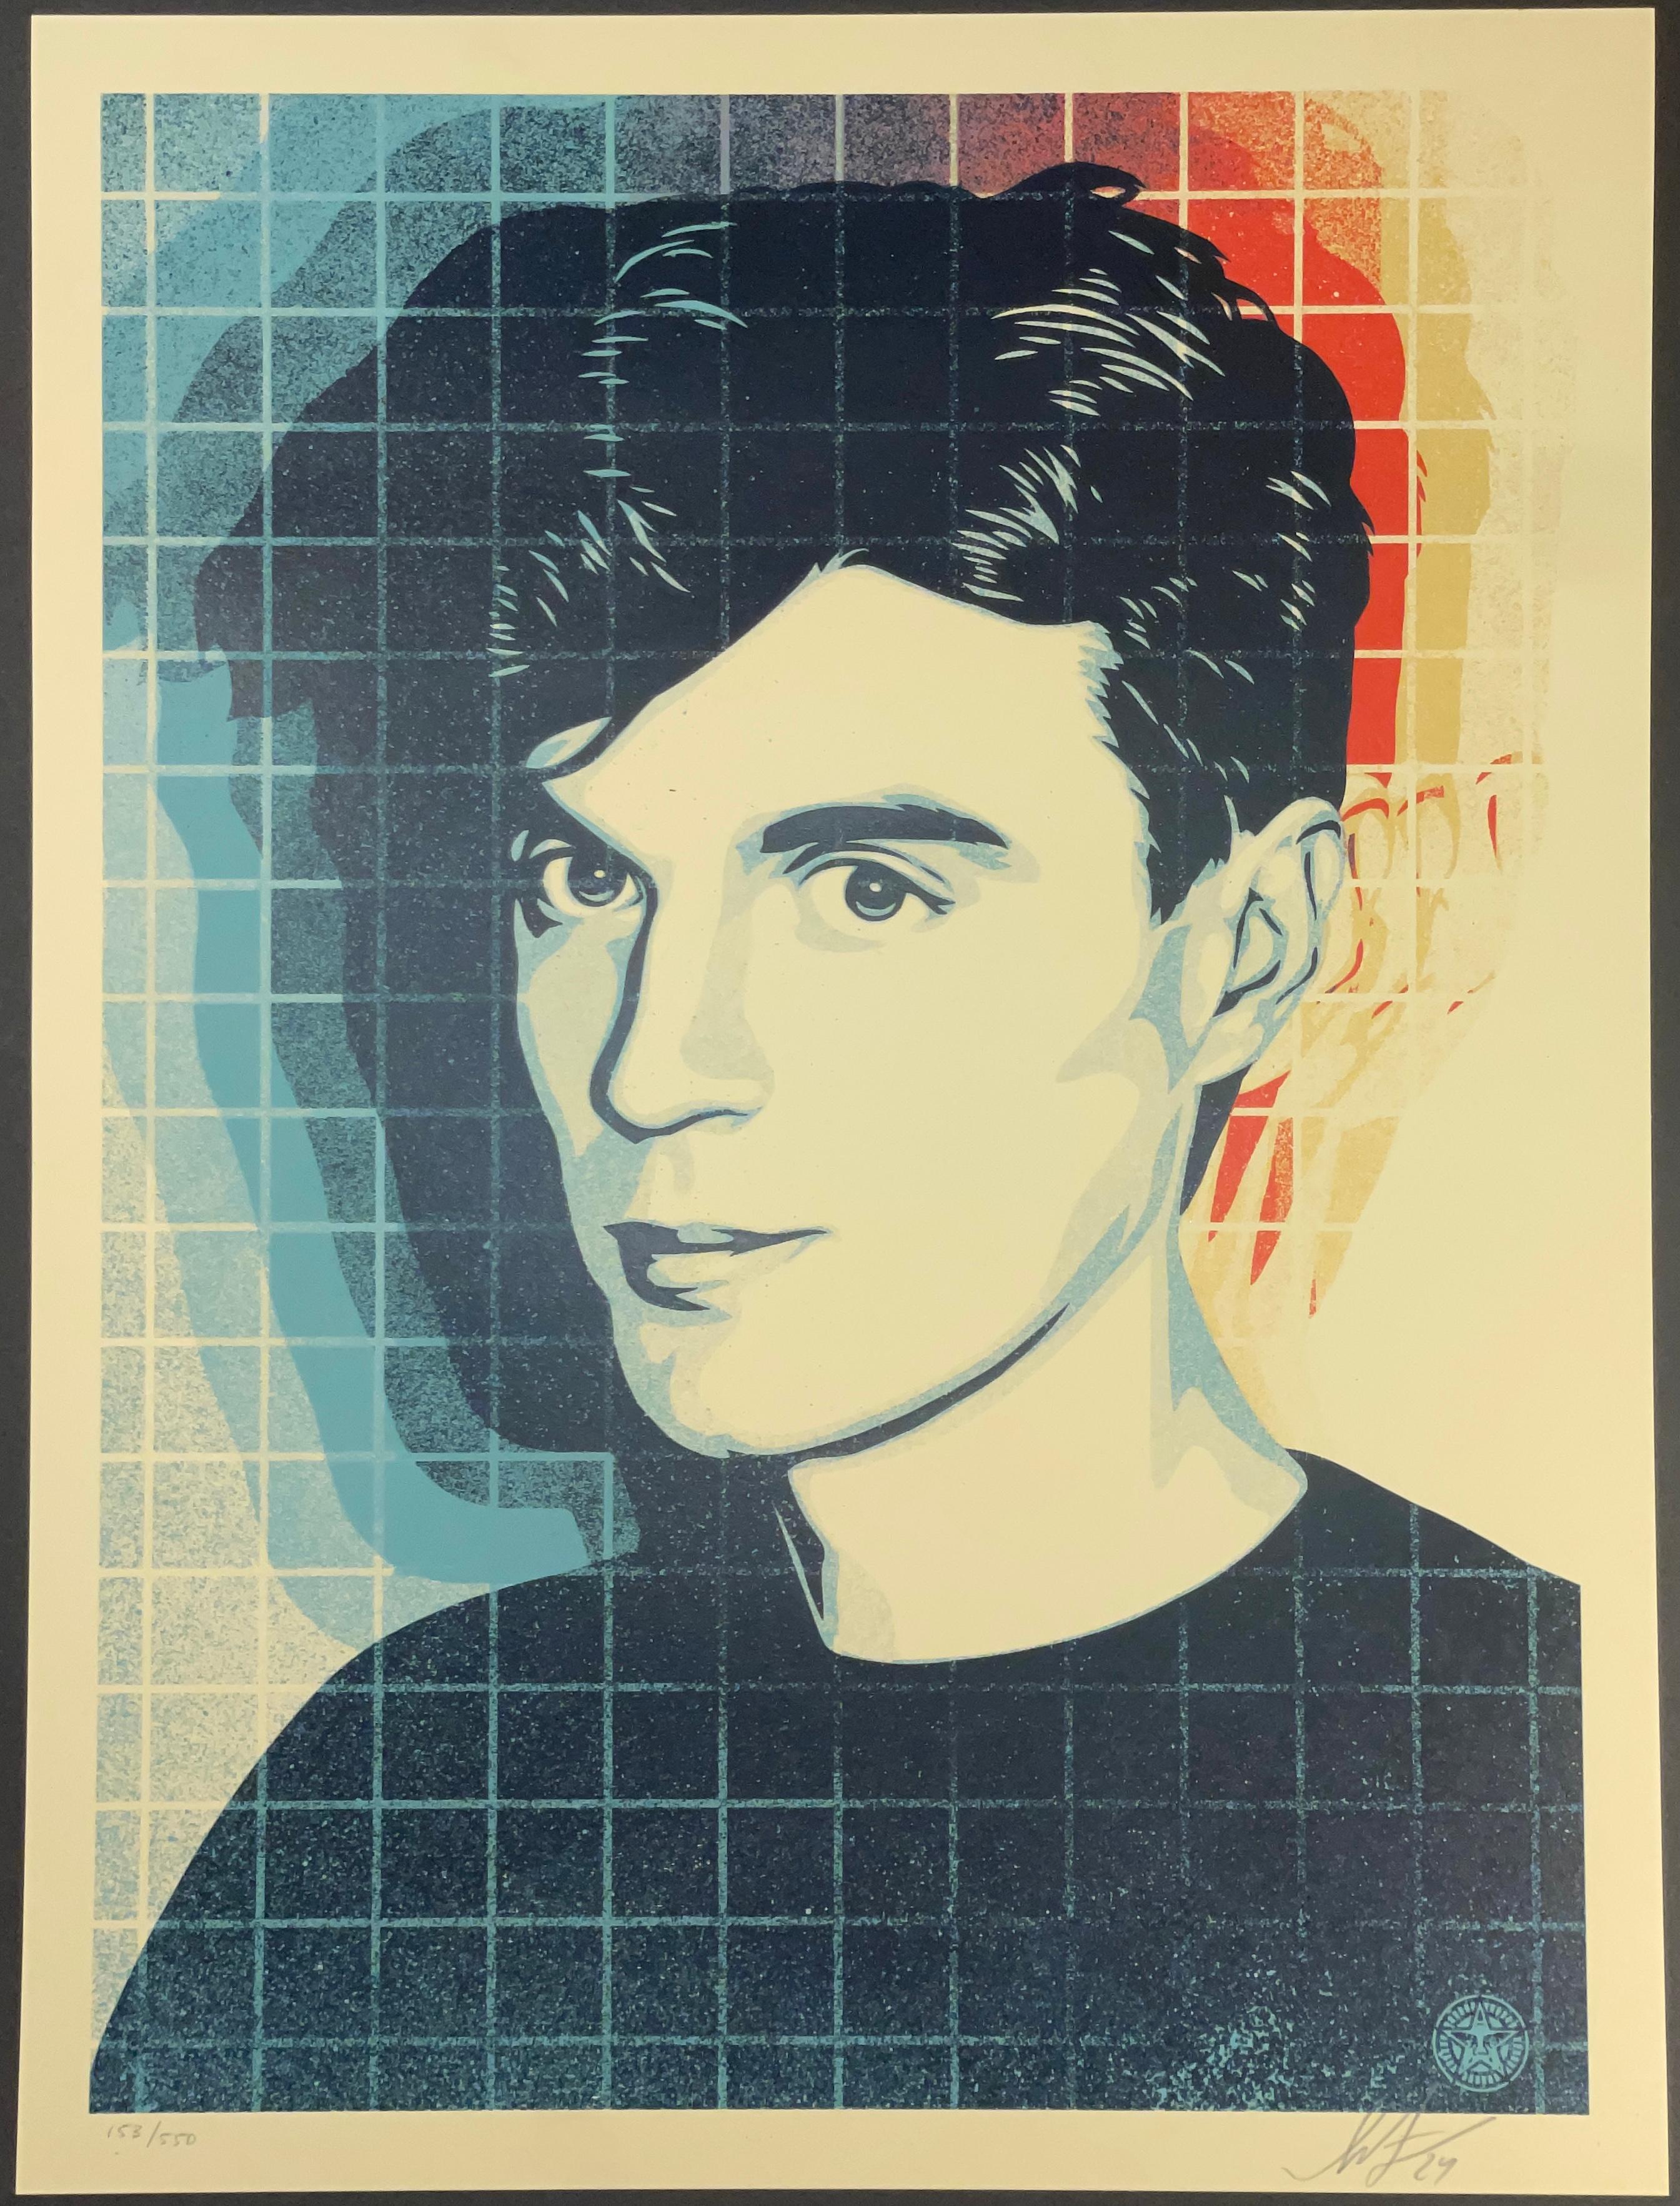 David Byrne "Overloading the Grid" by Shepard Fairey Print Talking Heads Obey